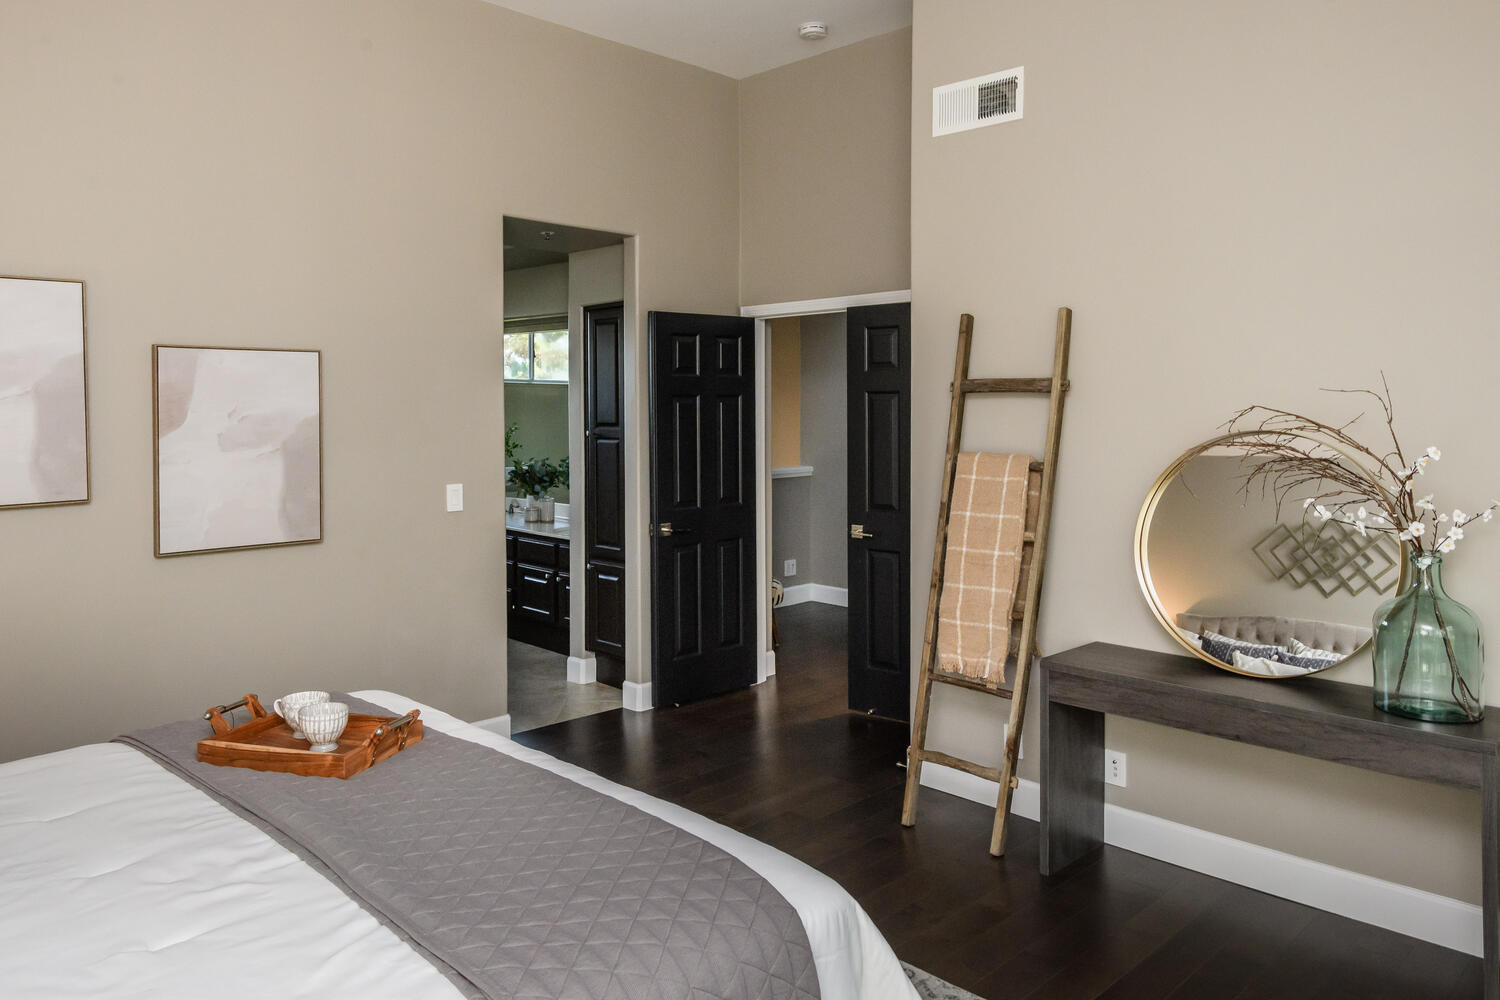 Bedroom Mirror in Lighthouse Cove area in Redwood Shores.